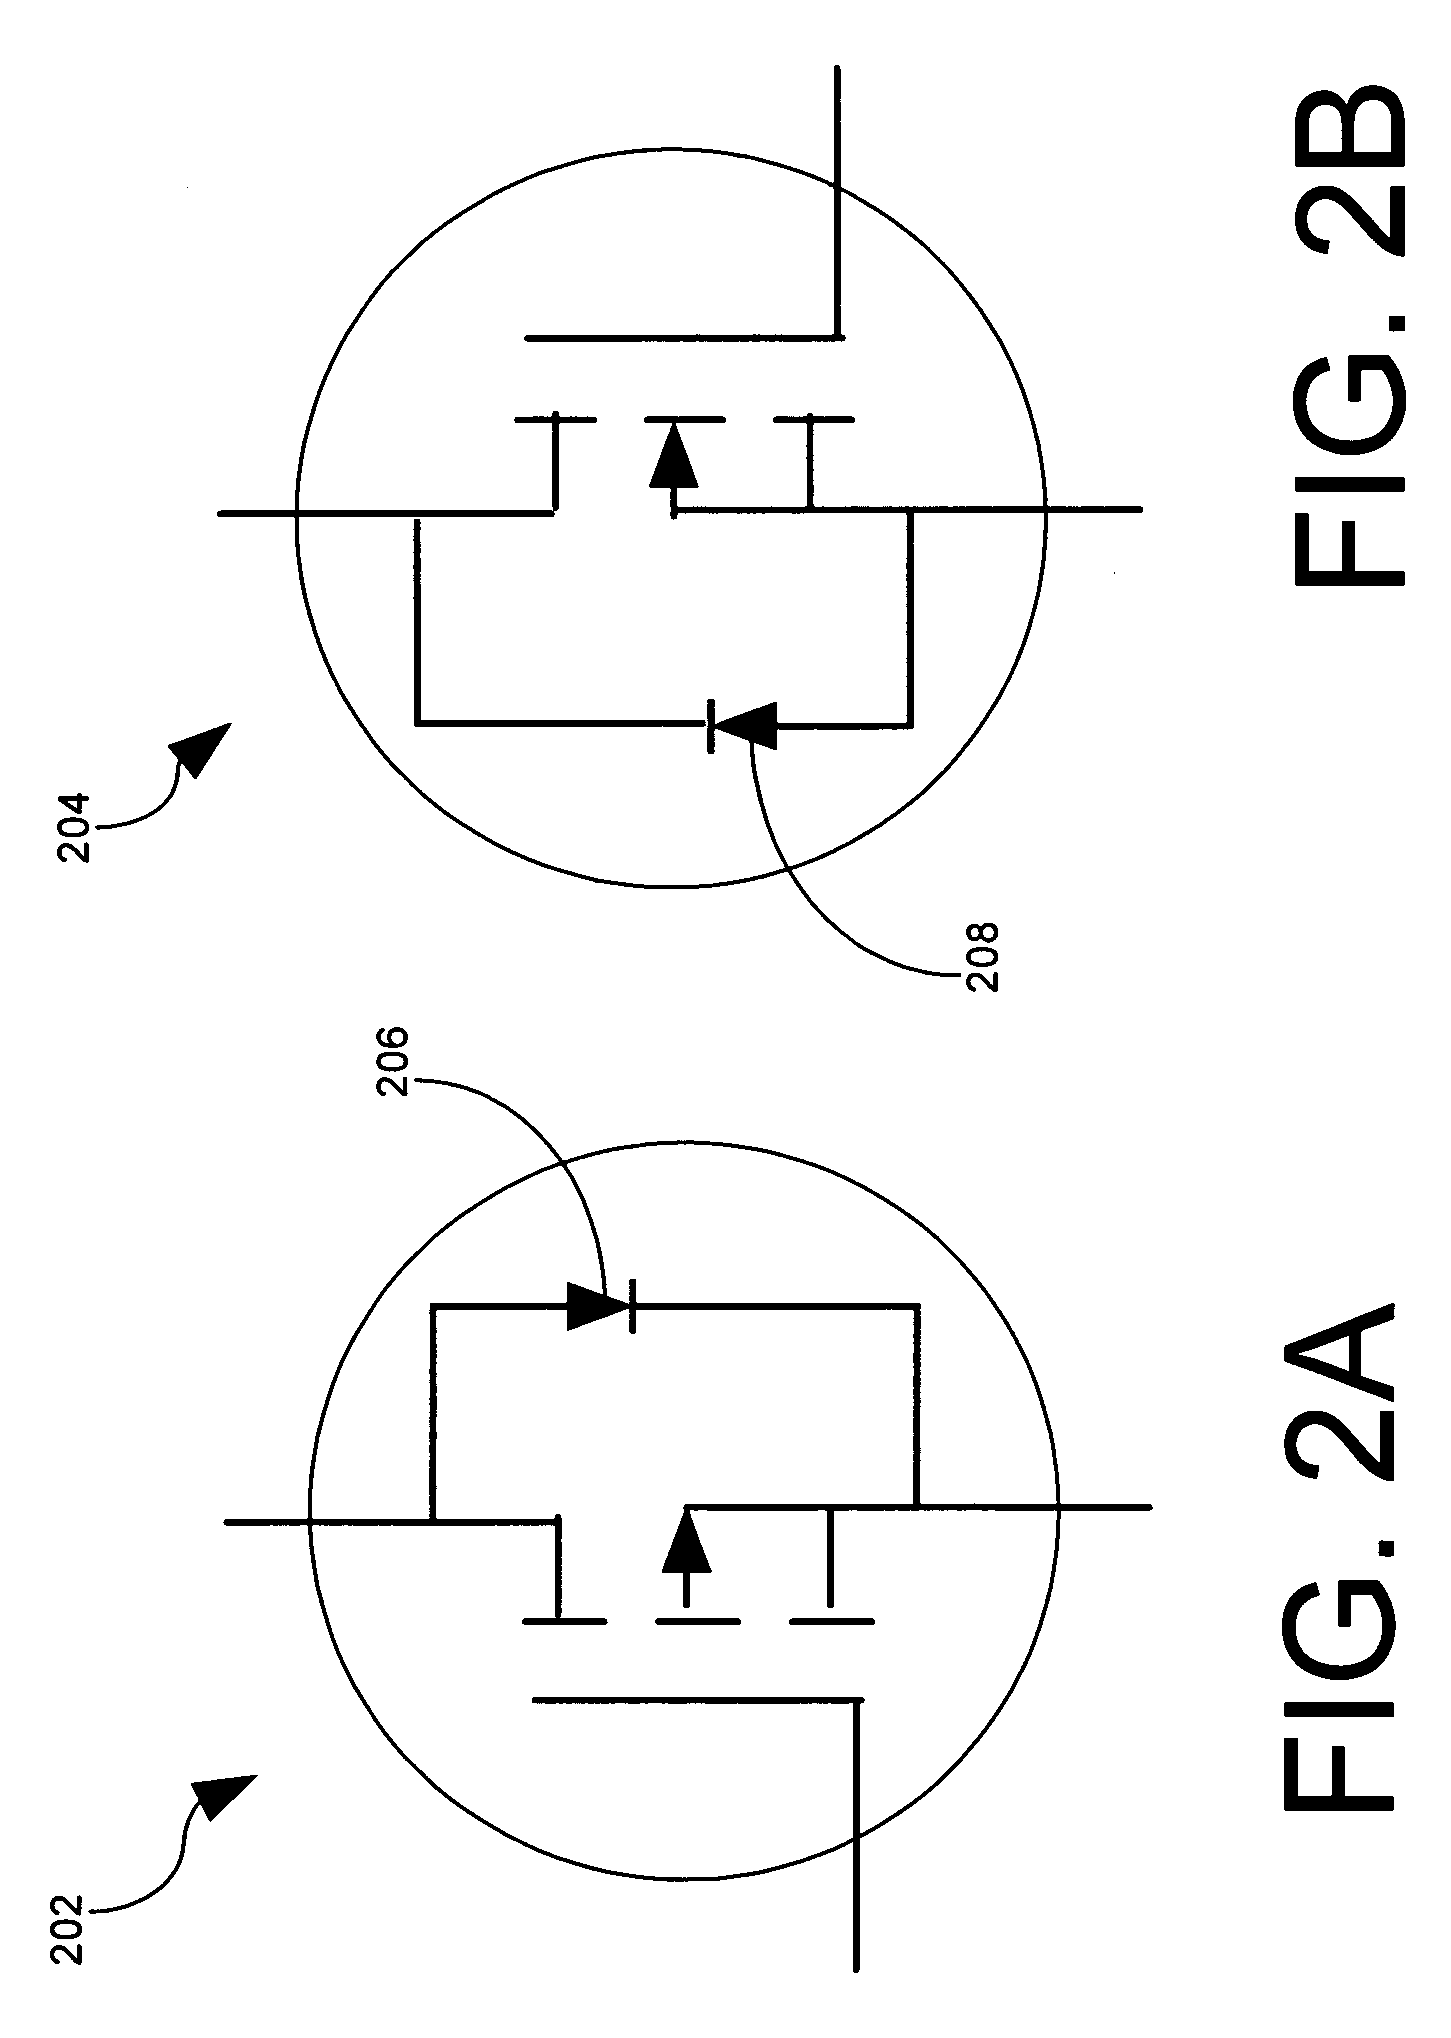 Low-loss rectifier with shoot-through current protection